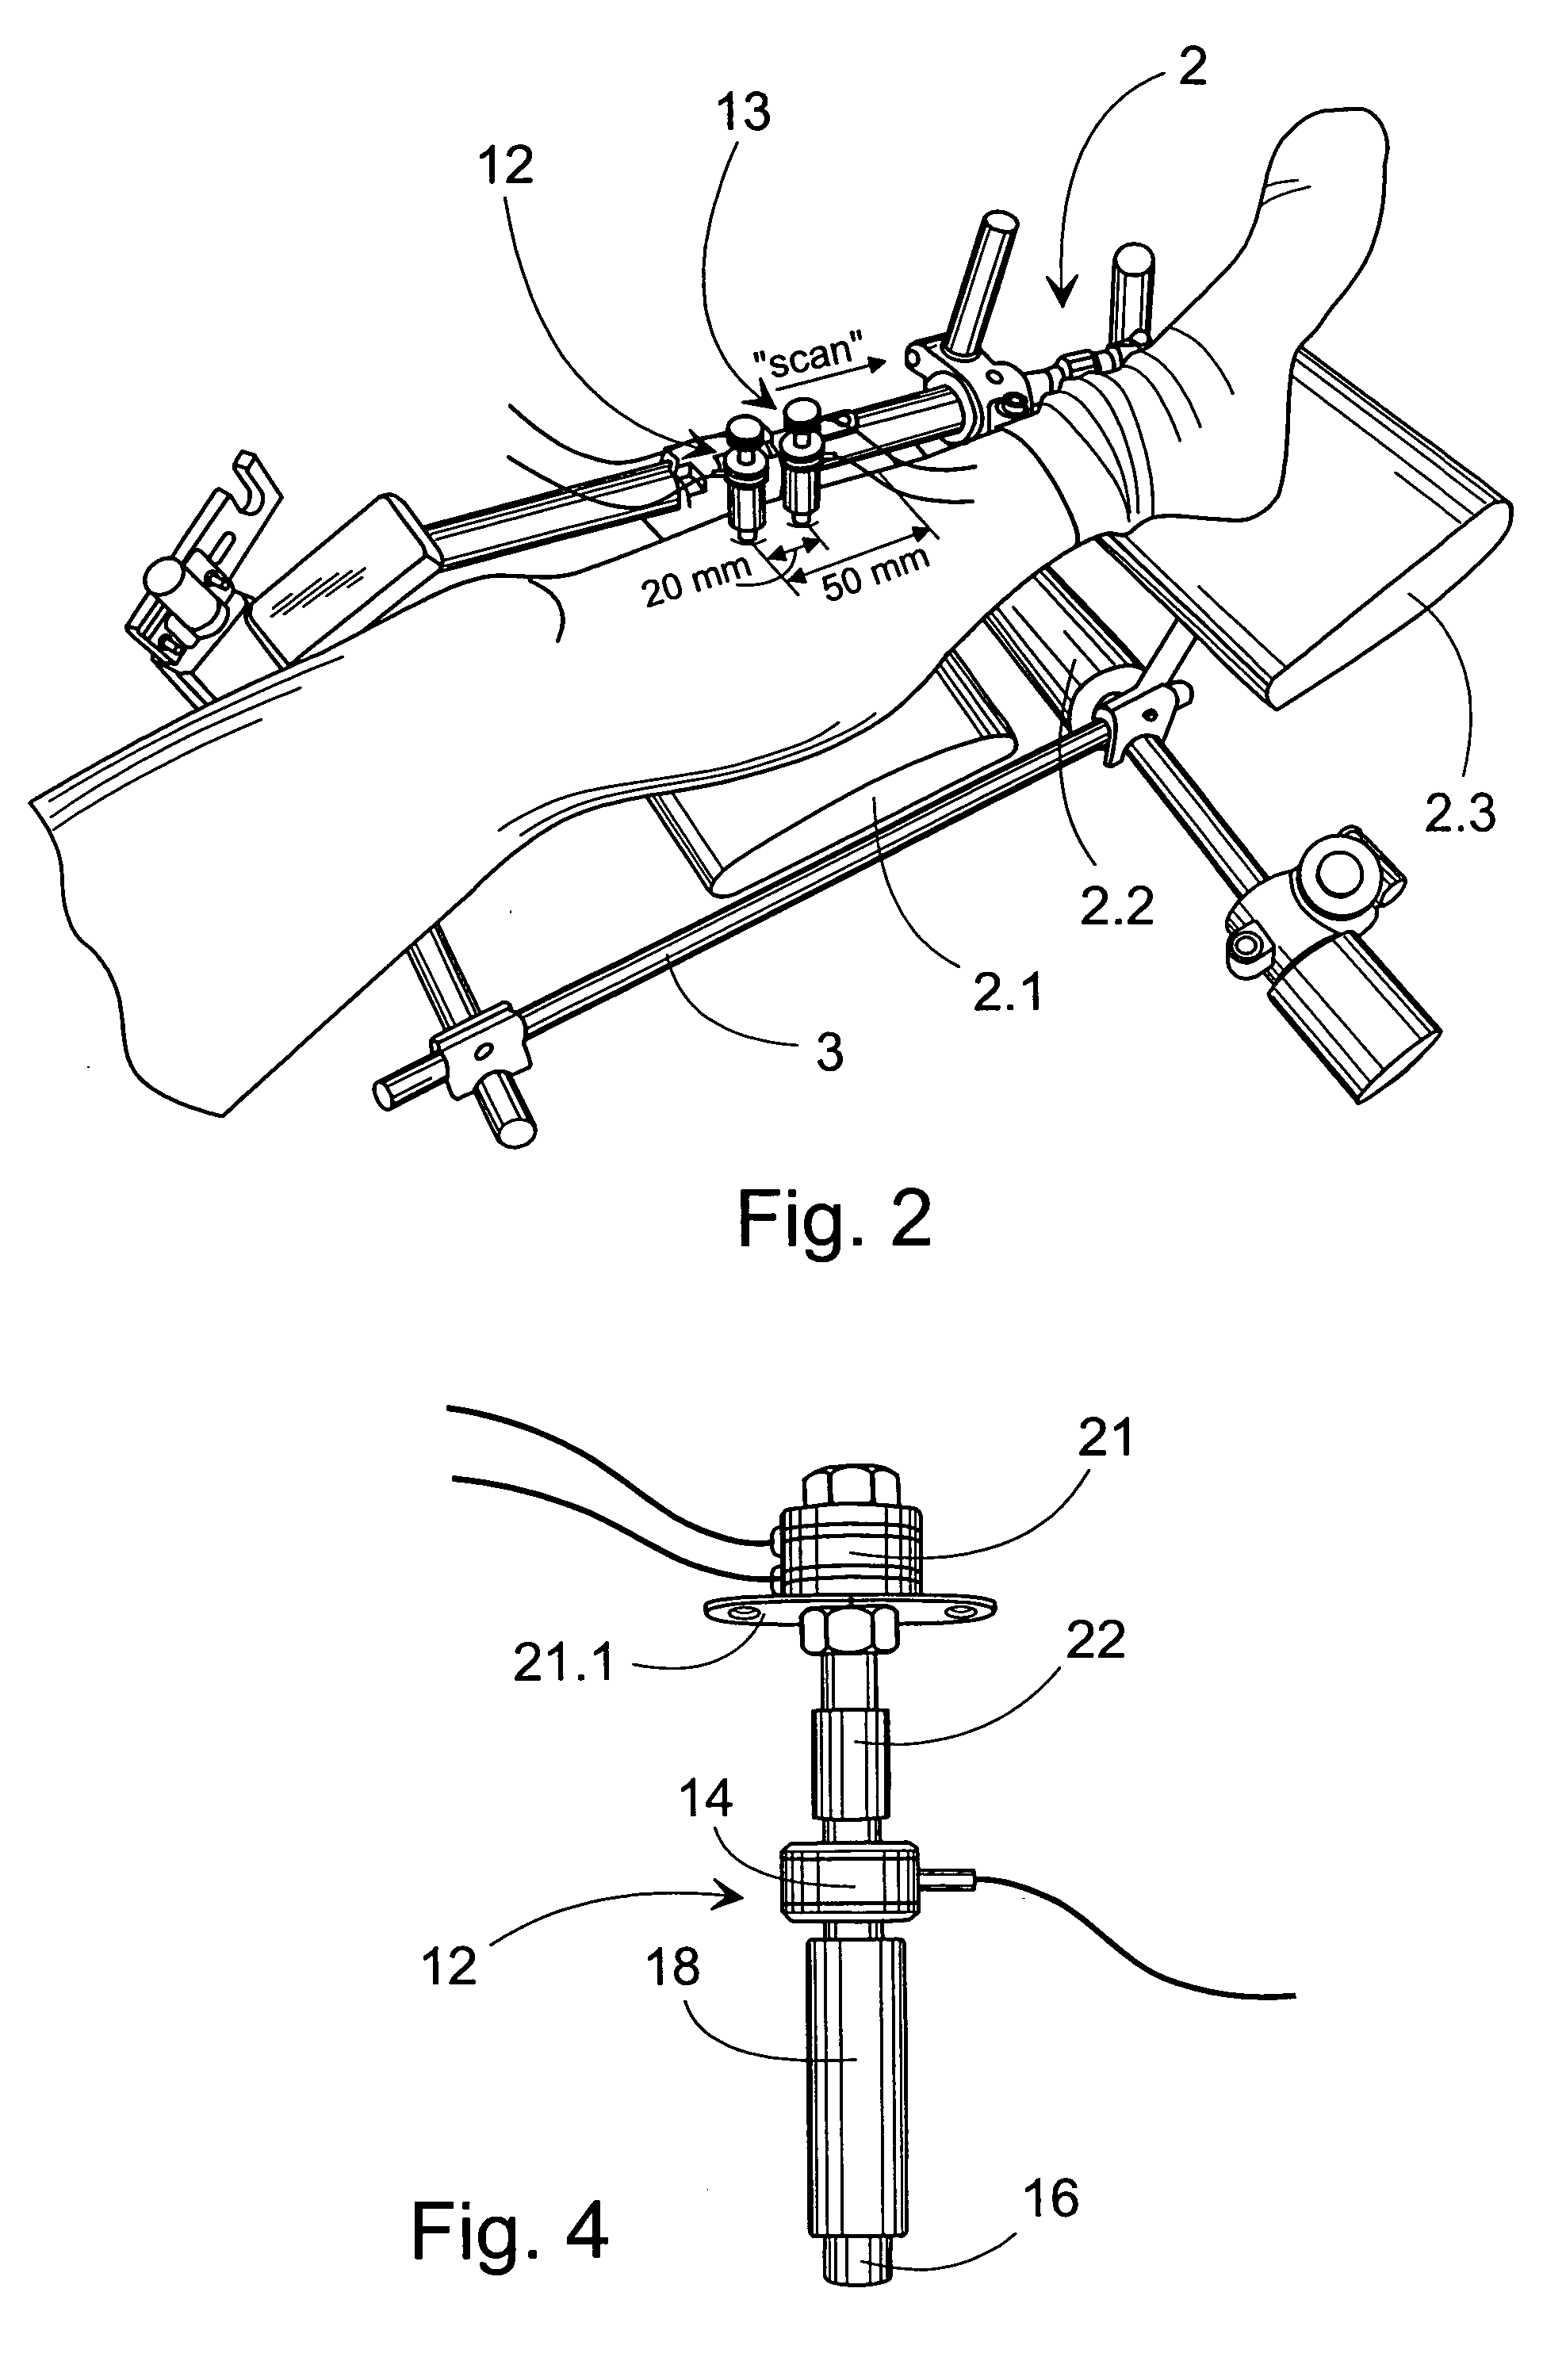 Method and device for the non-invasive assessement of bones